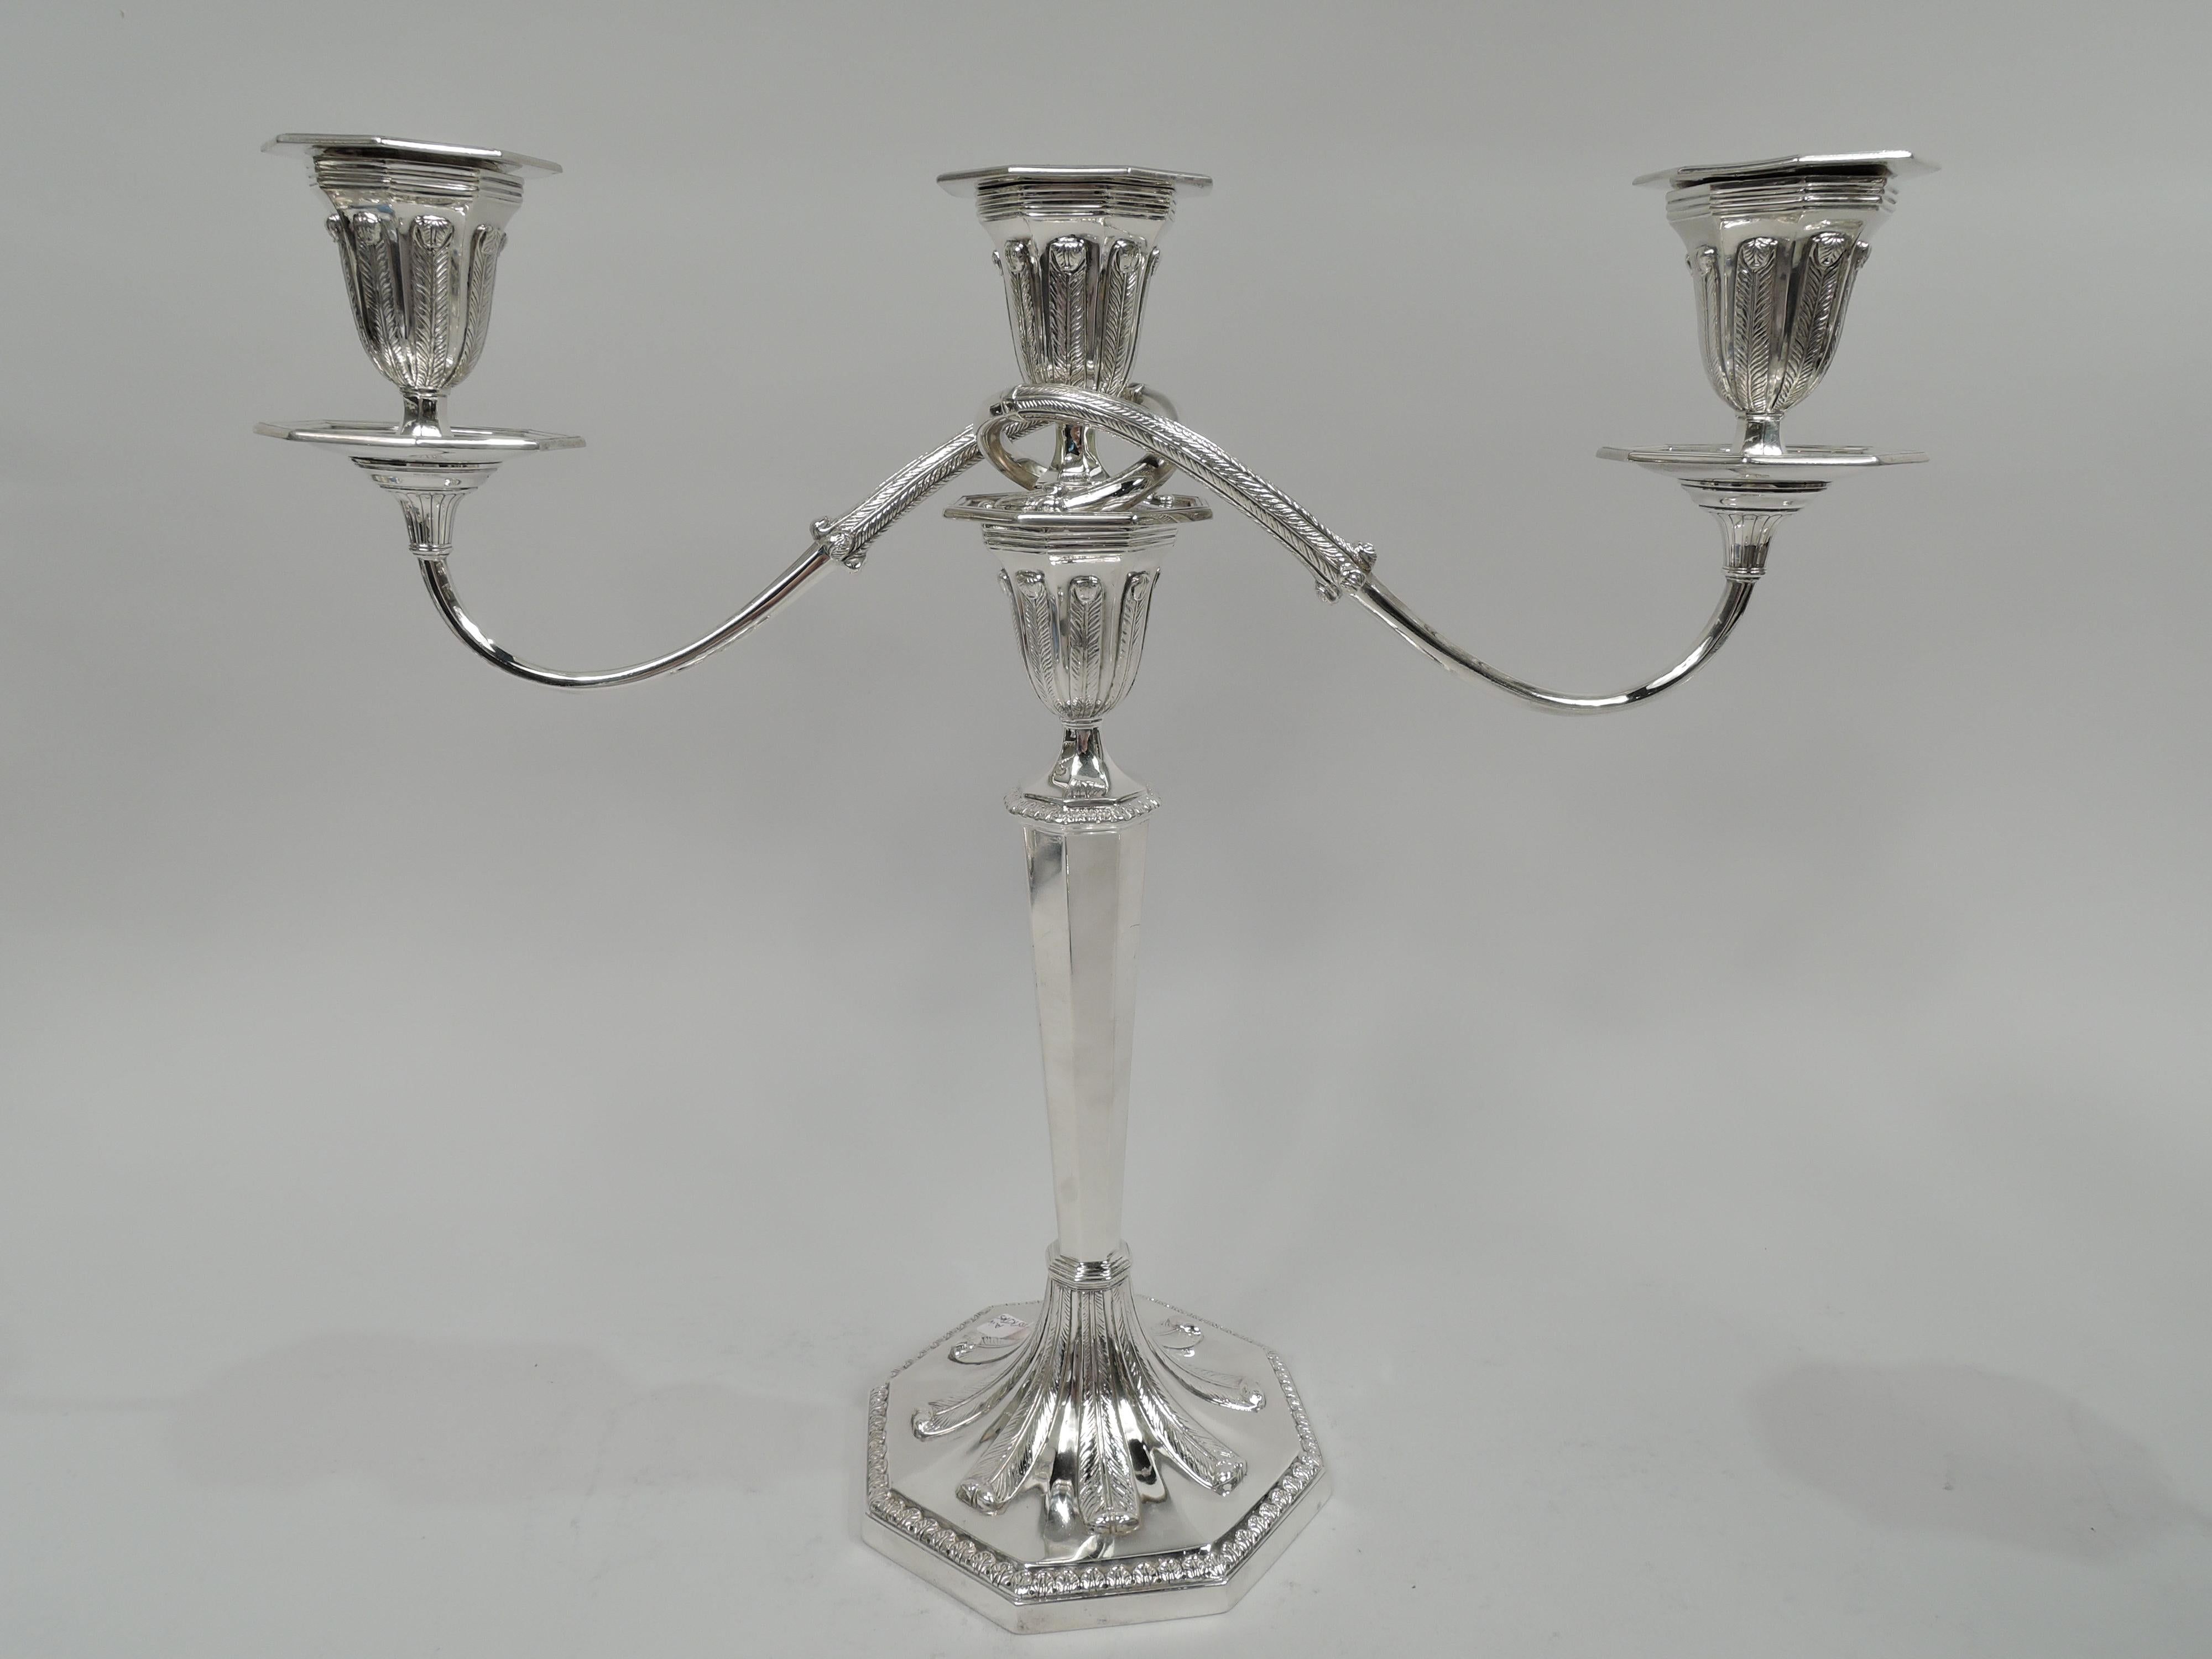 Pair of English Neoclassical sterling silver 3-light candelabra. Made by Tiffany & Co. in New York, ca 1928. Each: Two leaf-wrapped arms, each terminating in single socket, wrapped around a central socket. Arms set in single socket mounted to